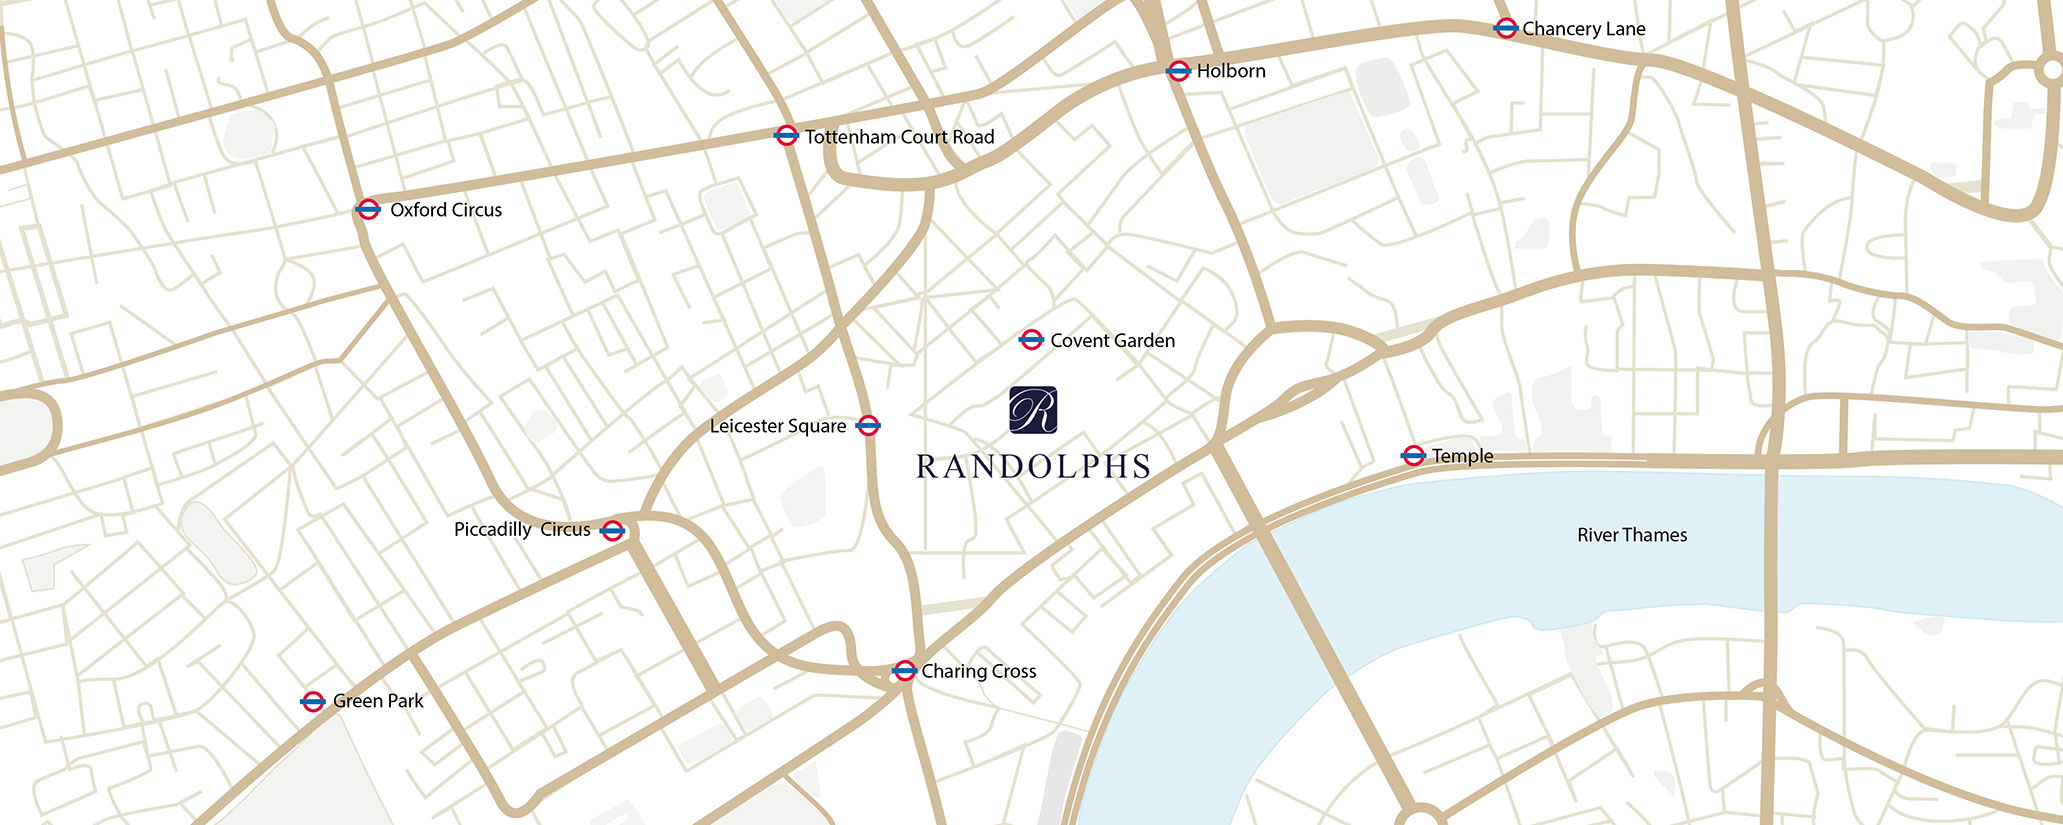 randolphs-butlers-and-vip-event-staffing-7-8-henrietta-street-covent-garden-london-WC2E8PW-map